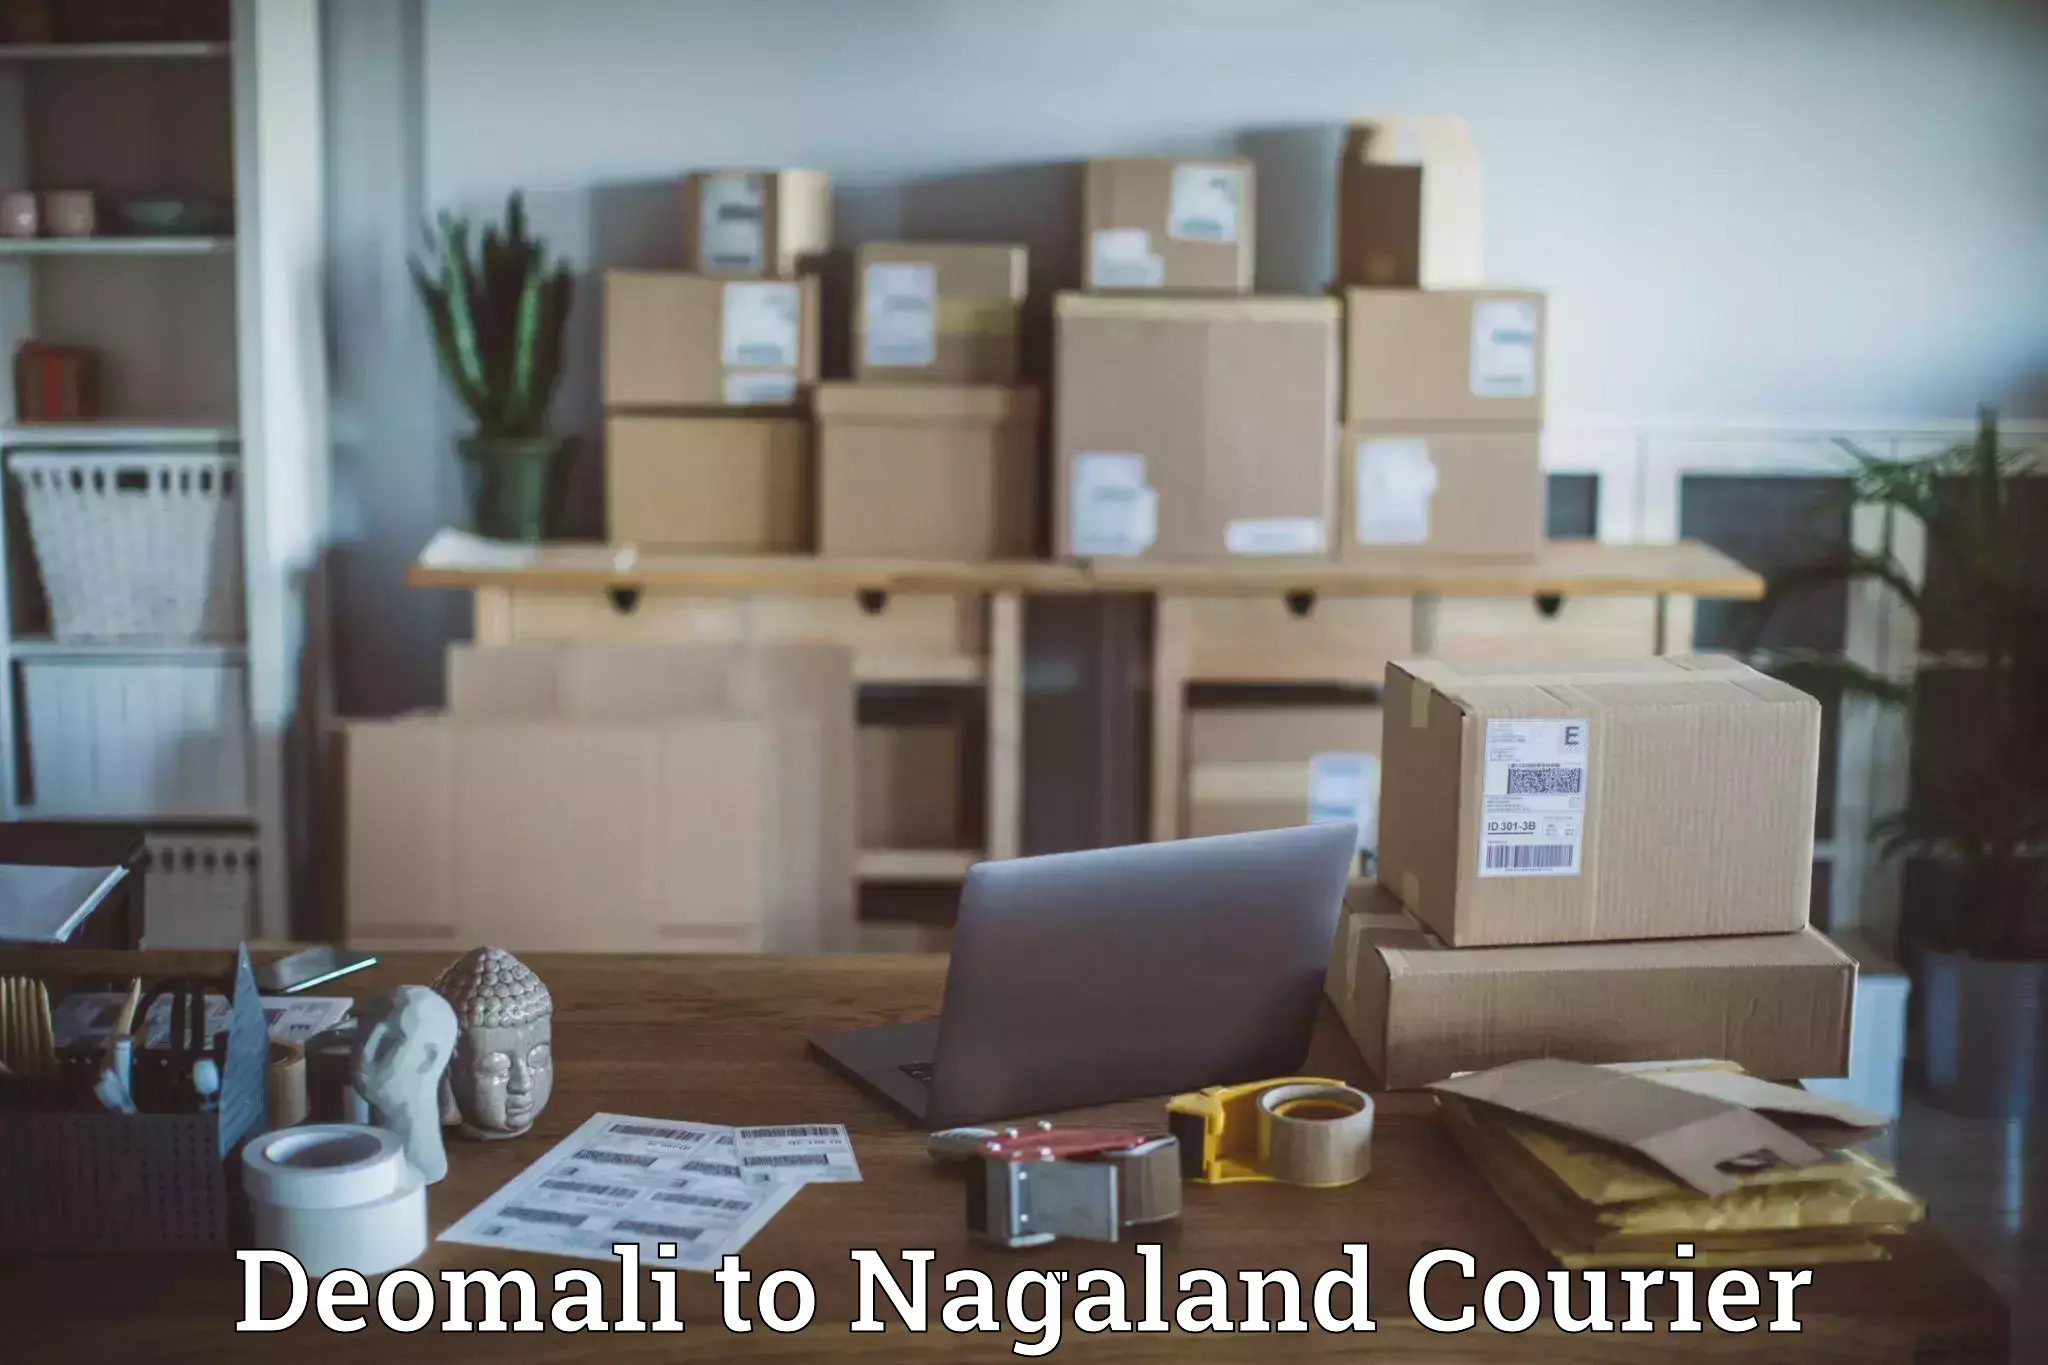 High-speed parcel service Deomali to Nagaland